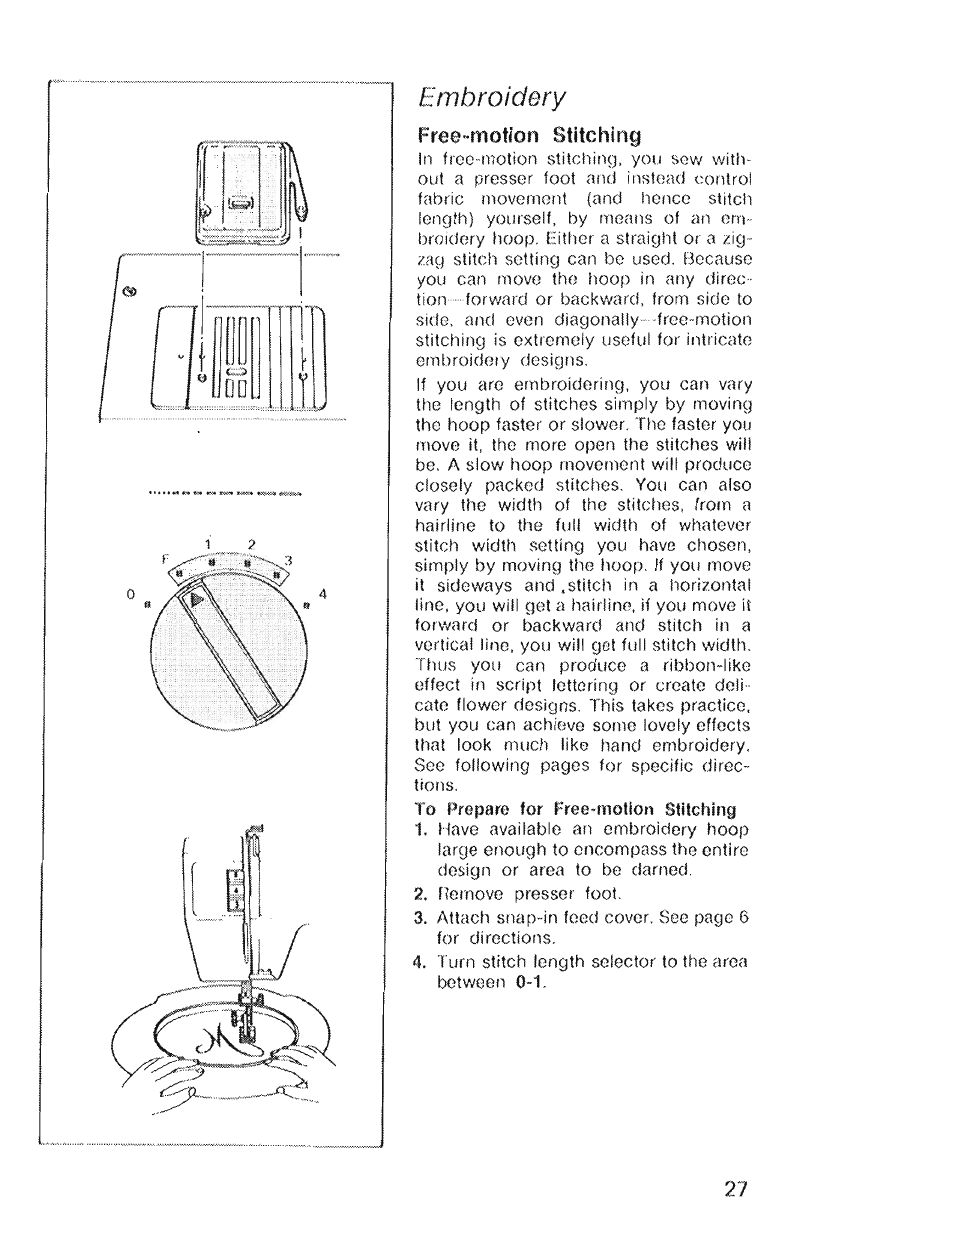 Embroidery, Free-motlon stitching | SINGER 4022 User Manual | Page 29 / 56